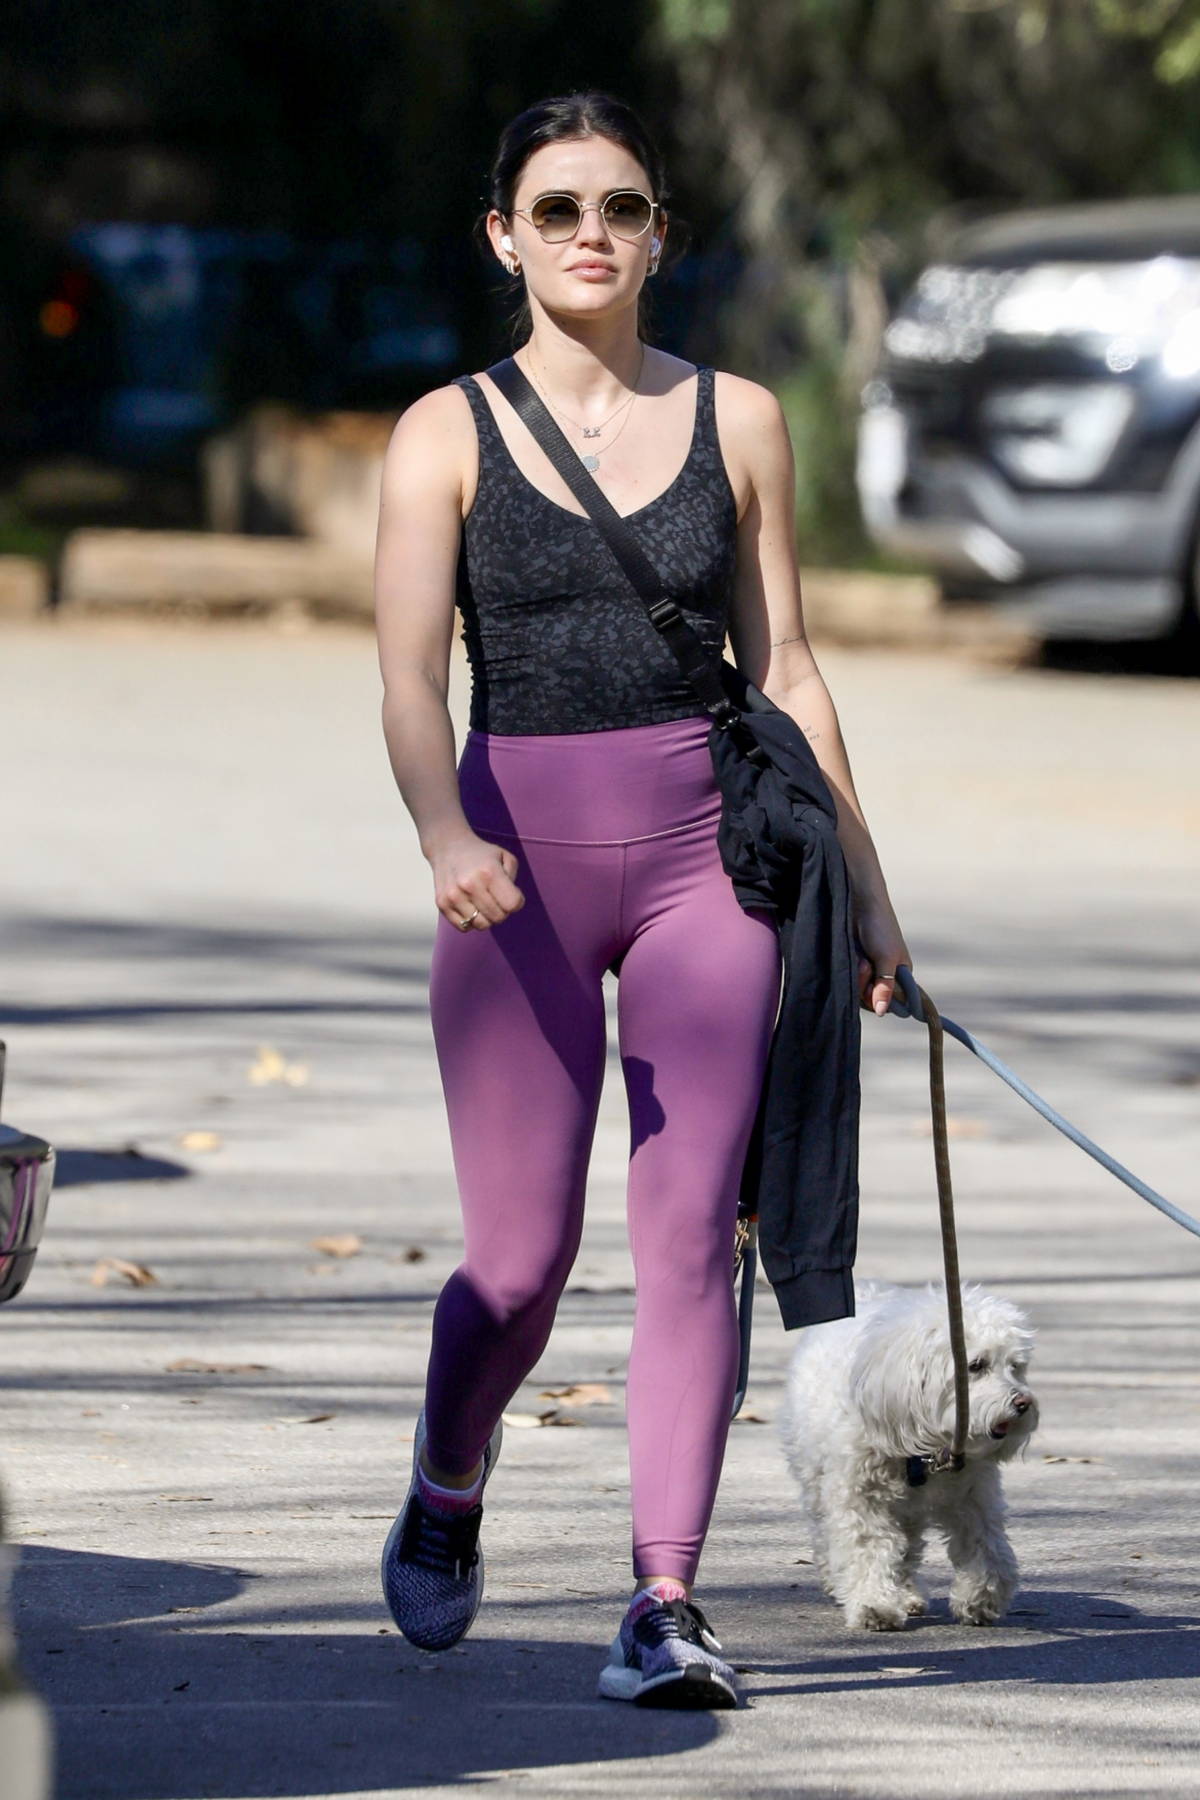 Lucy Hale displays her athletic figure in a black tank top and pink leggings  while out